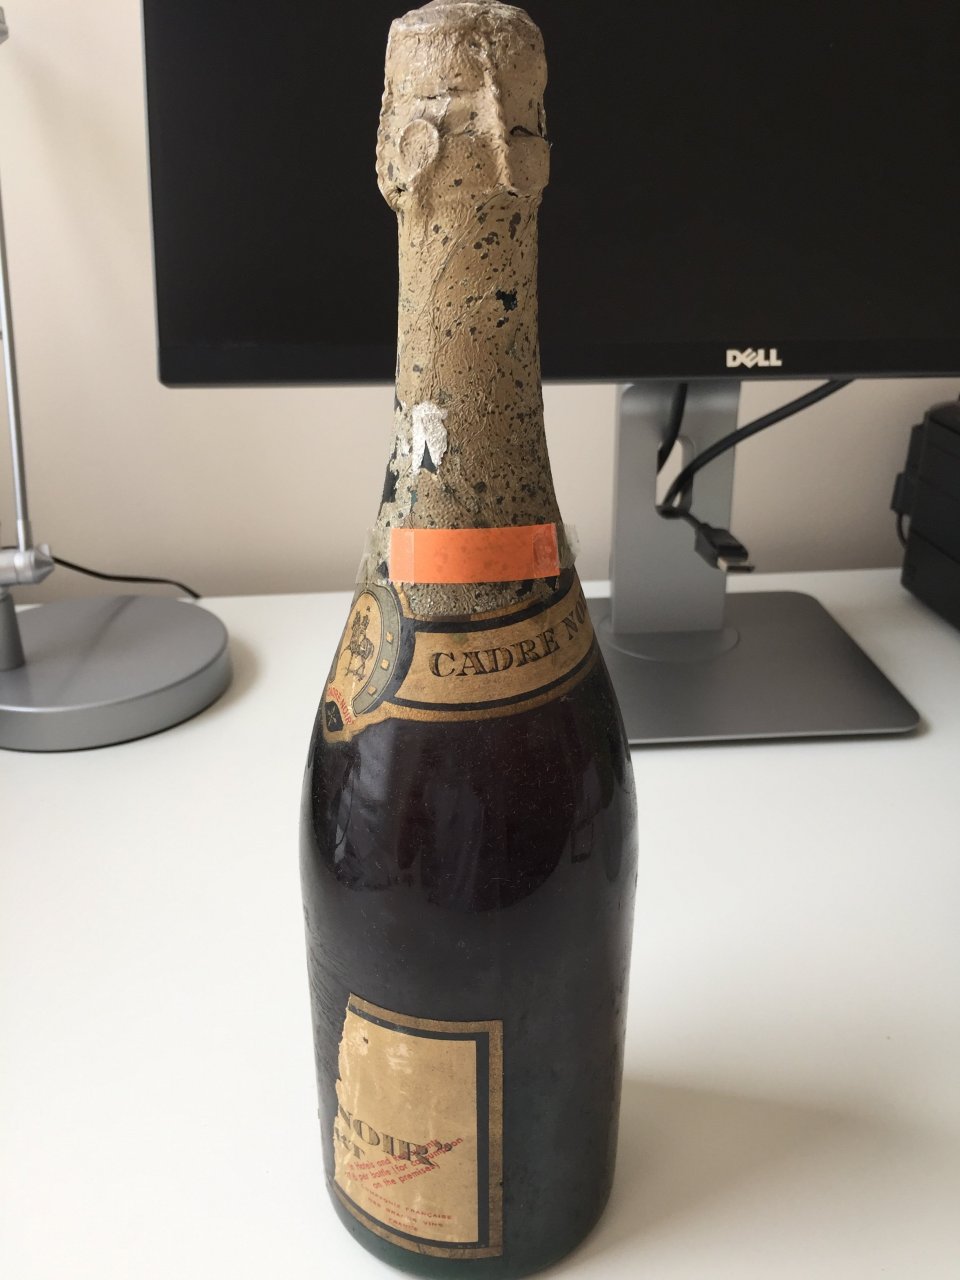 How Much Is This Bottle Of Champagne Worth.